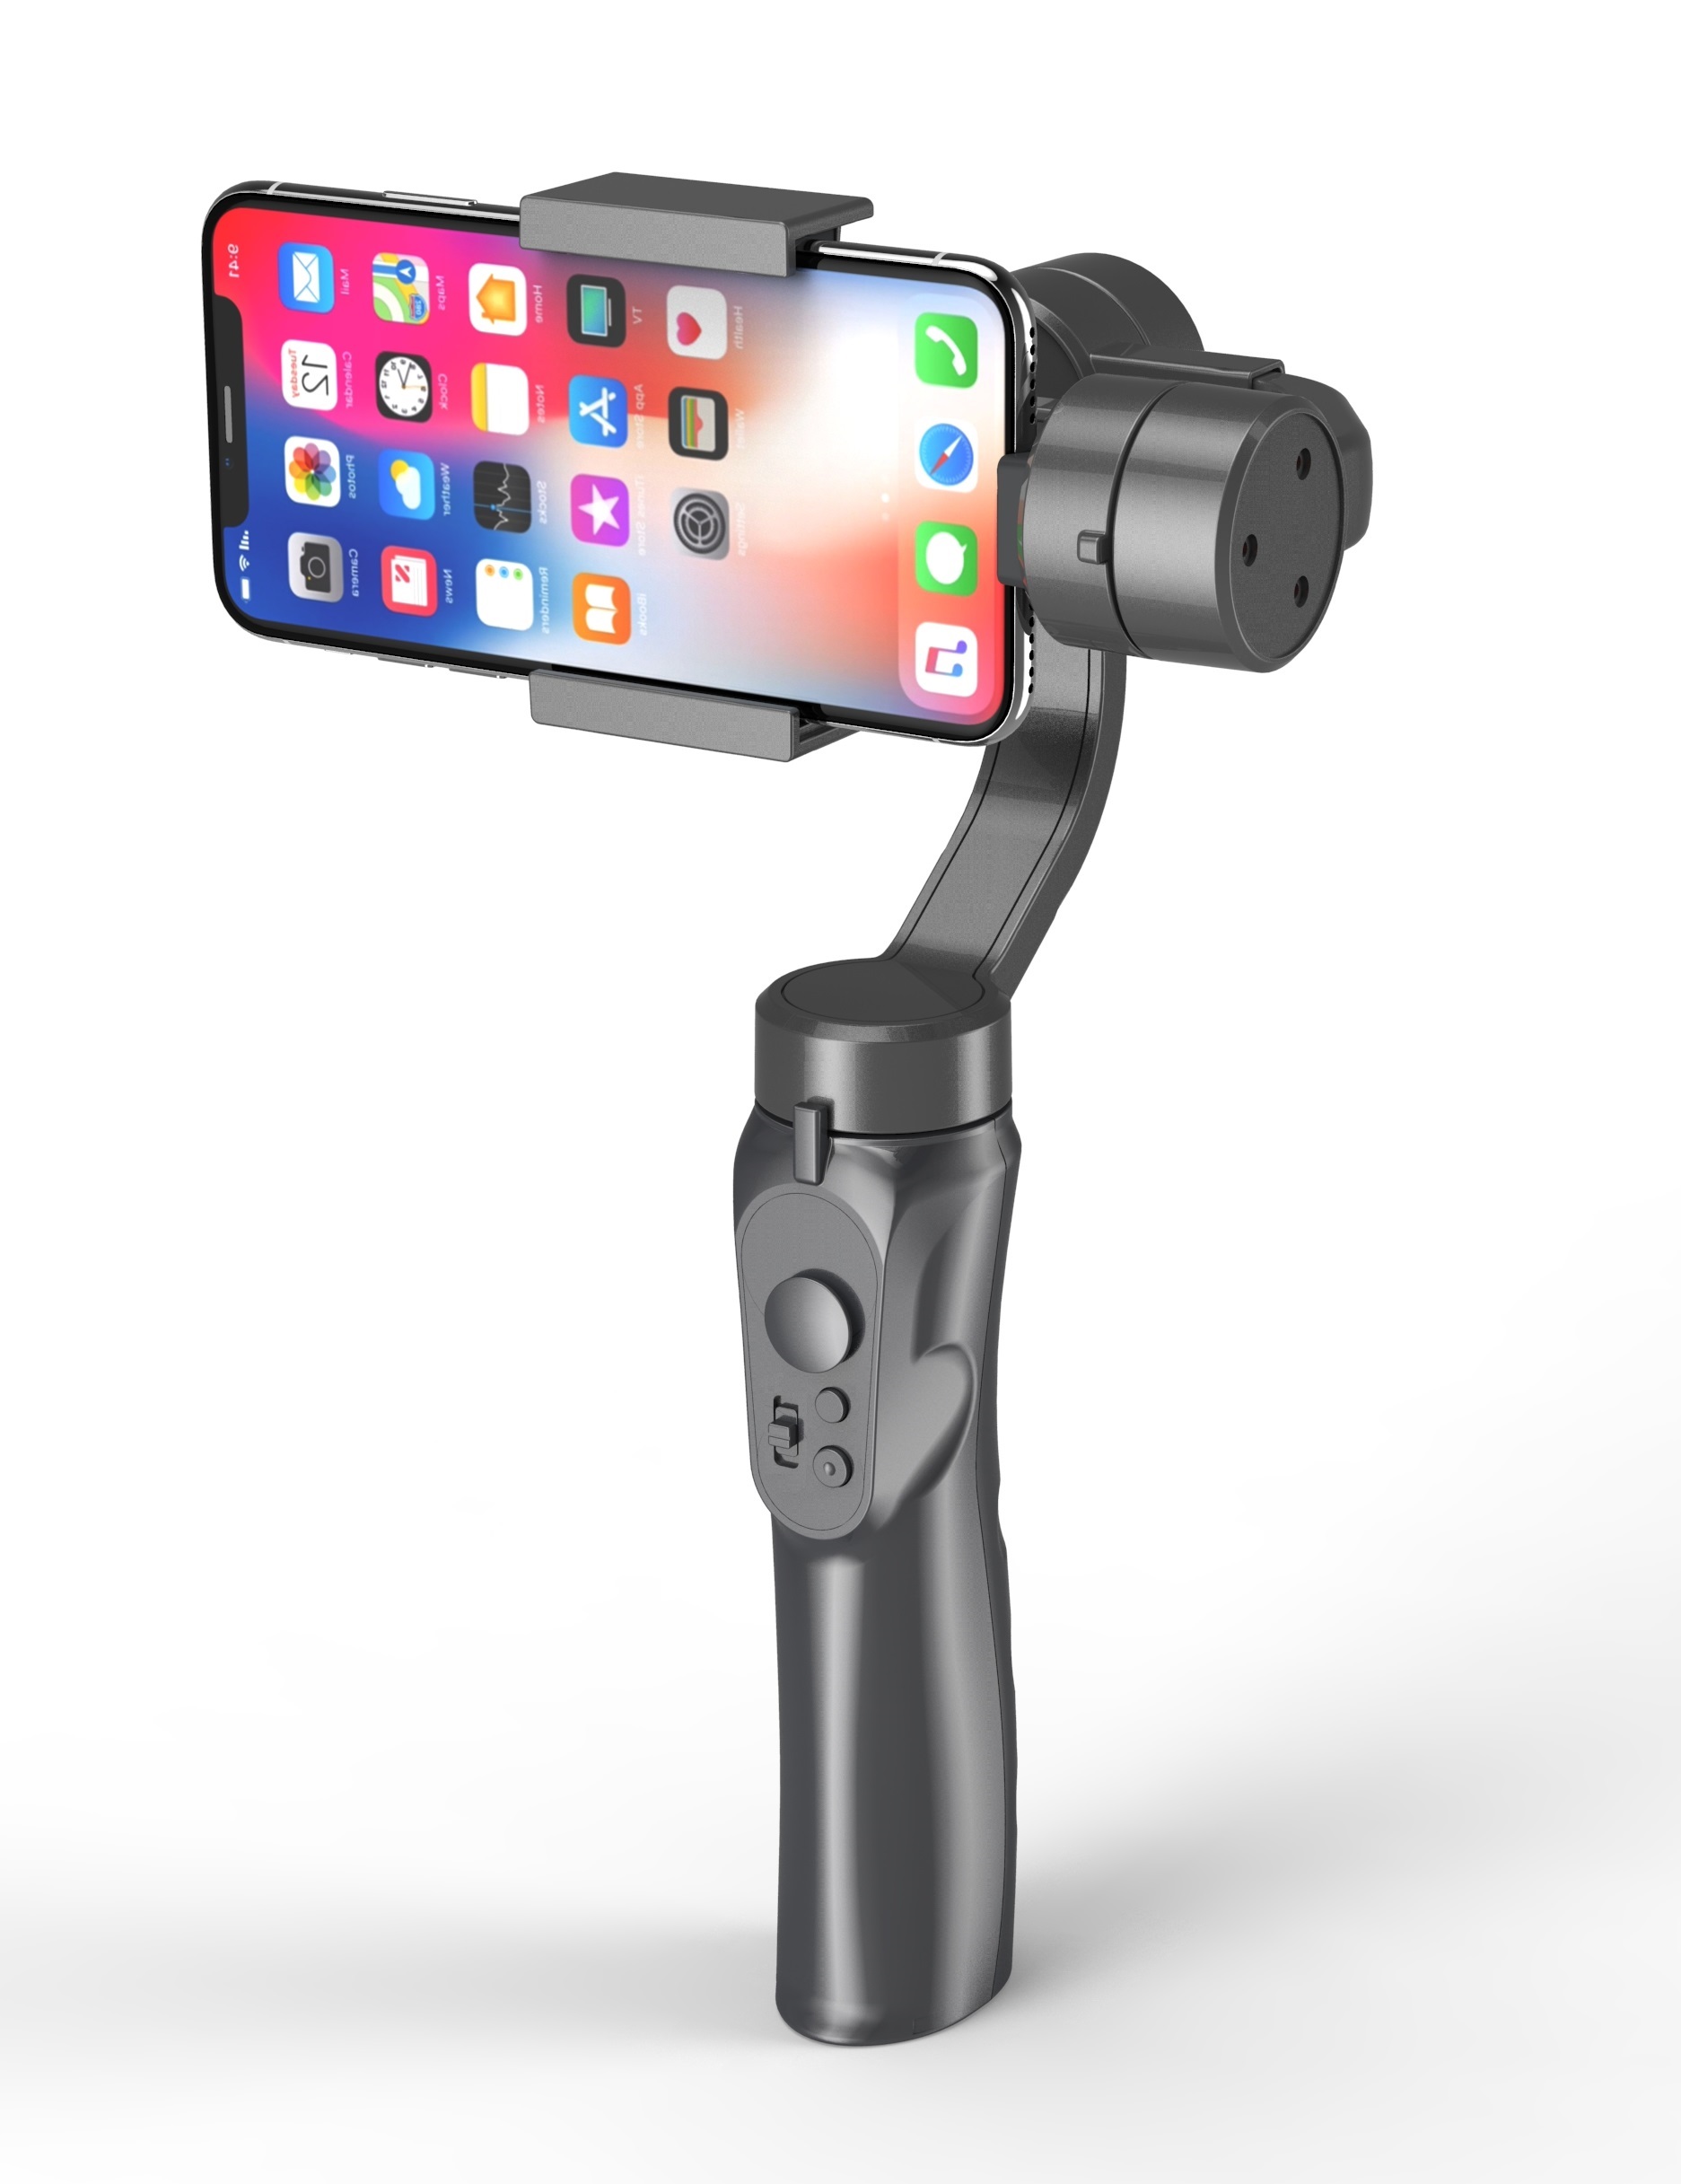 3-Axis Handheld Smartphone Gimbal Stabilizer for iPhone X 8Plus 8 7 Android Sports Cameras gray